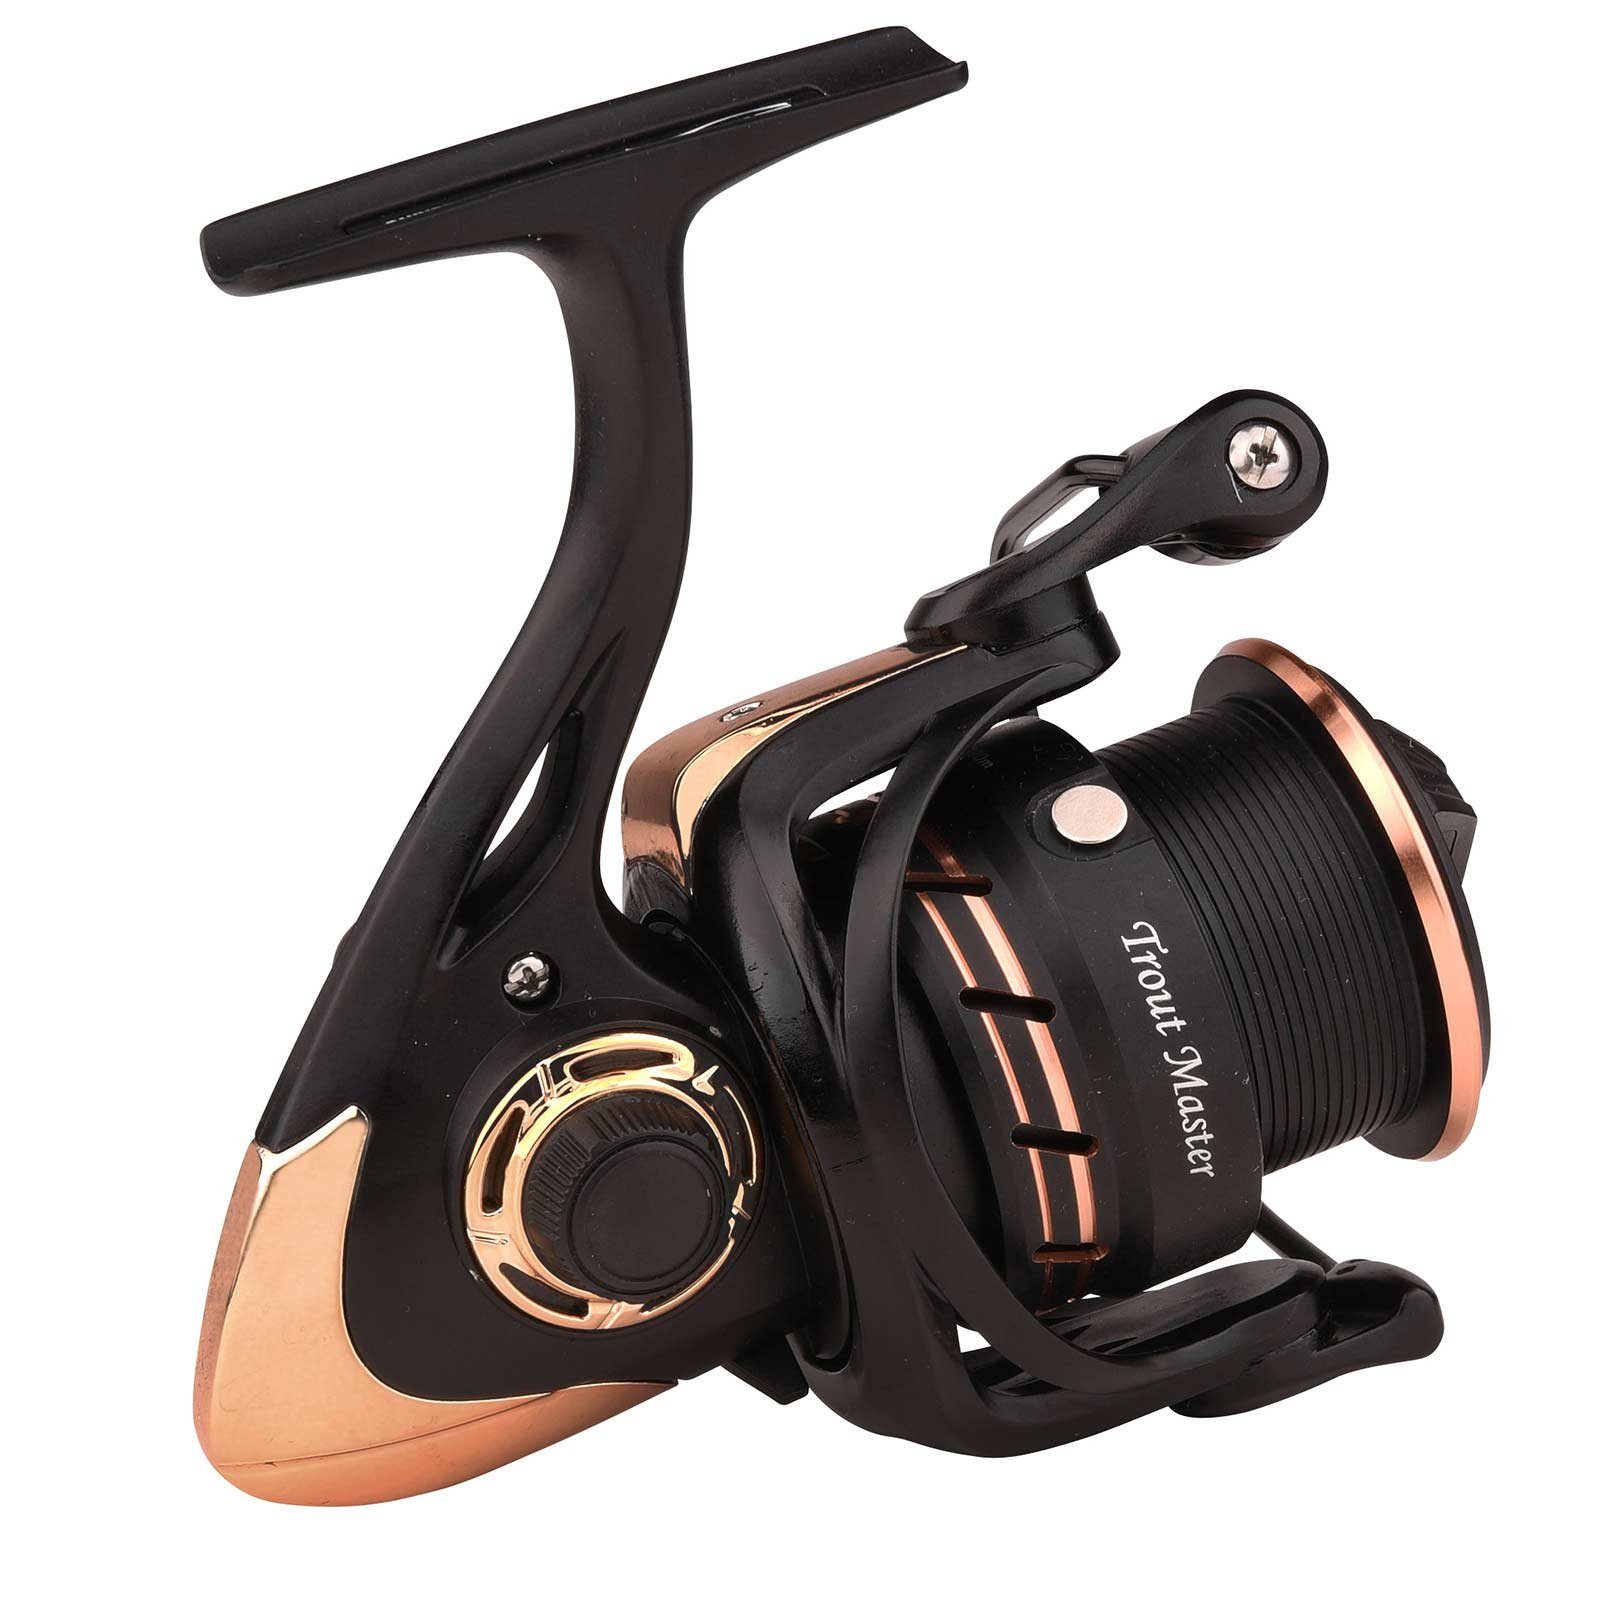 Stationärrolle), Spro Lite SPRO NT Trout 1000 Forellenrolle Master